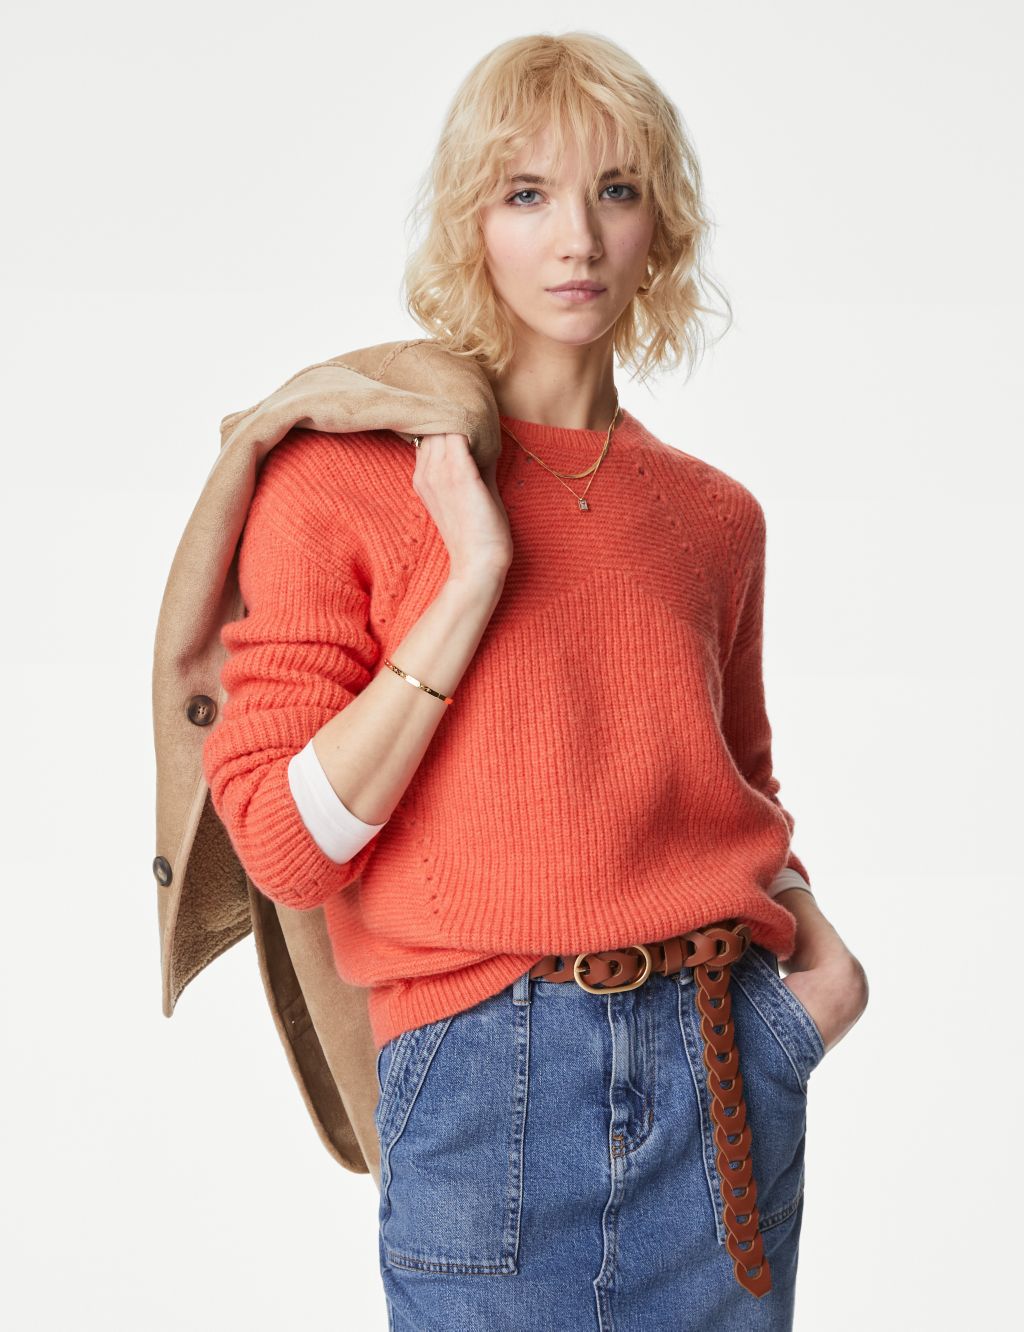 Pointelle Round Neck Jumper with Wool image 1